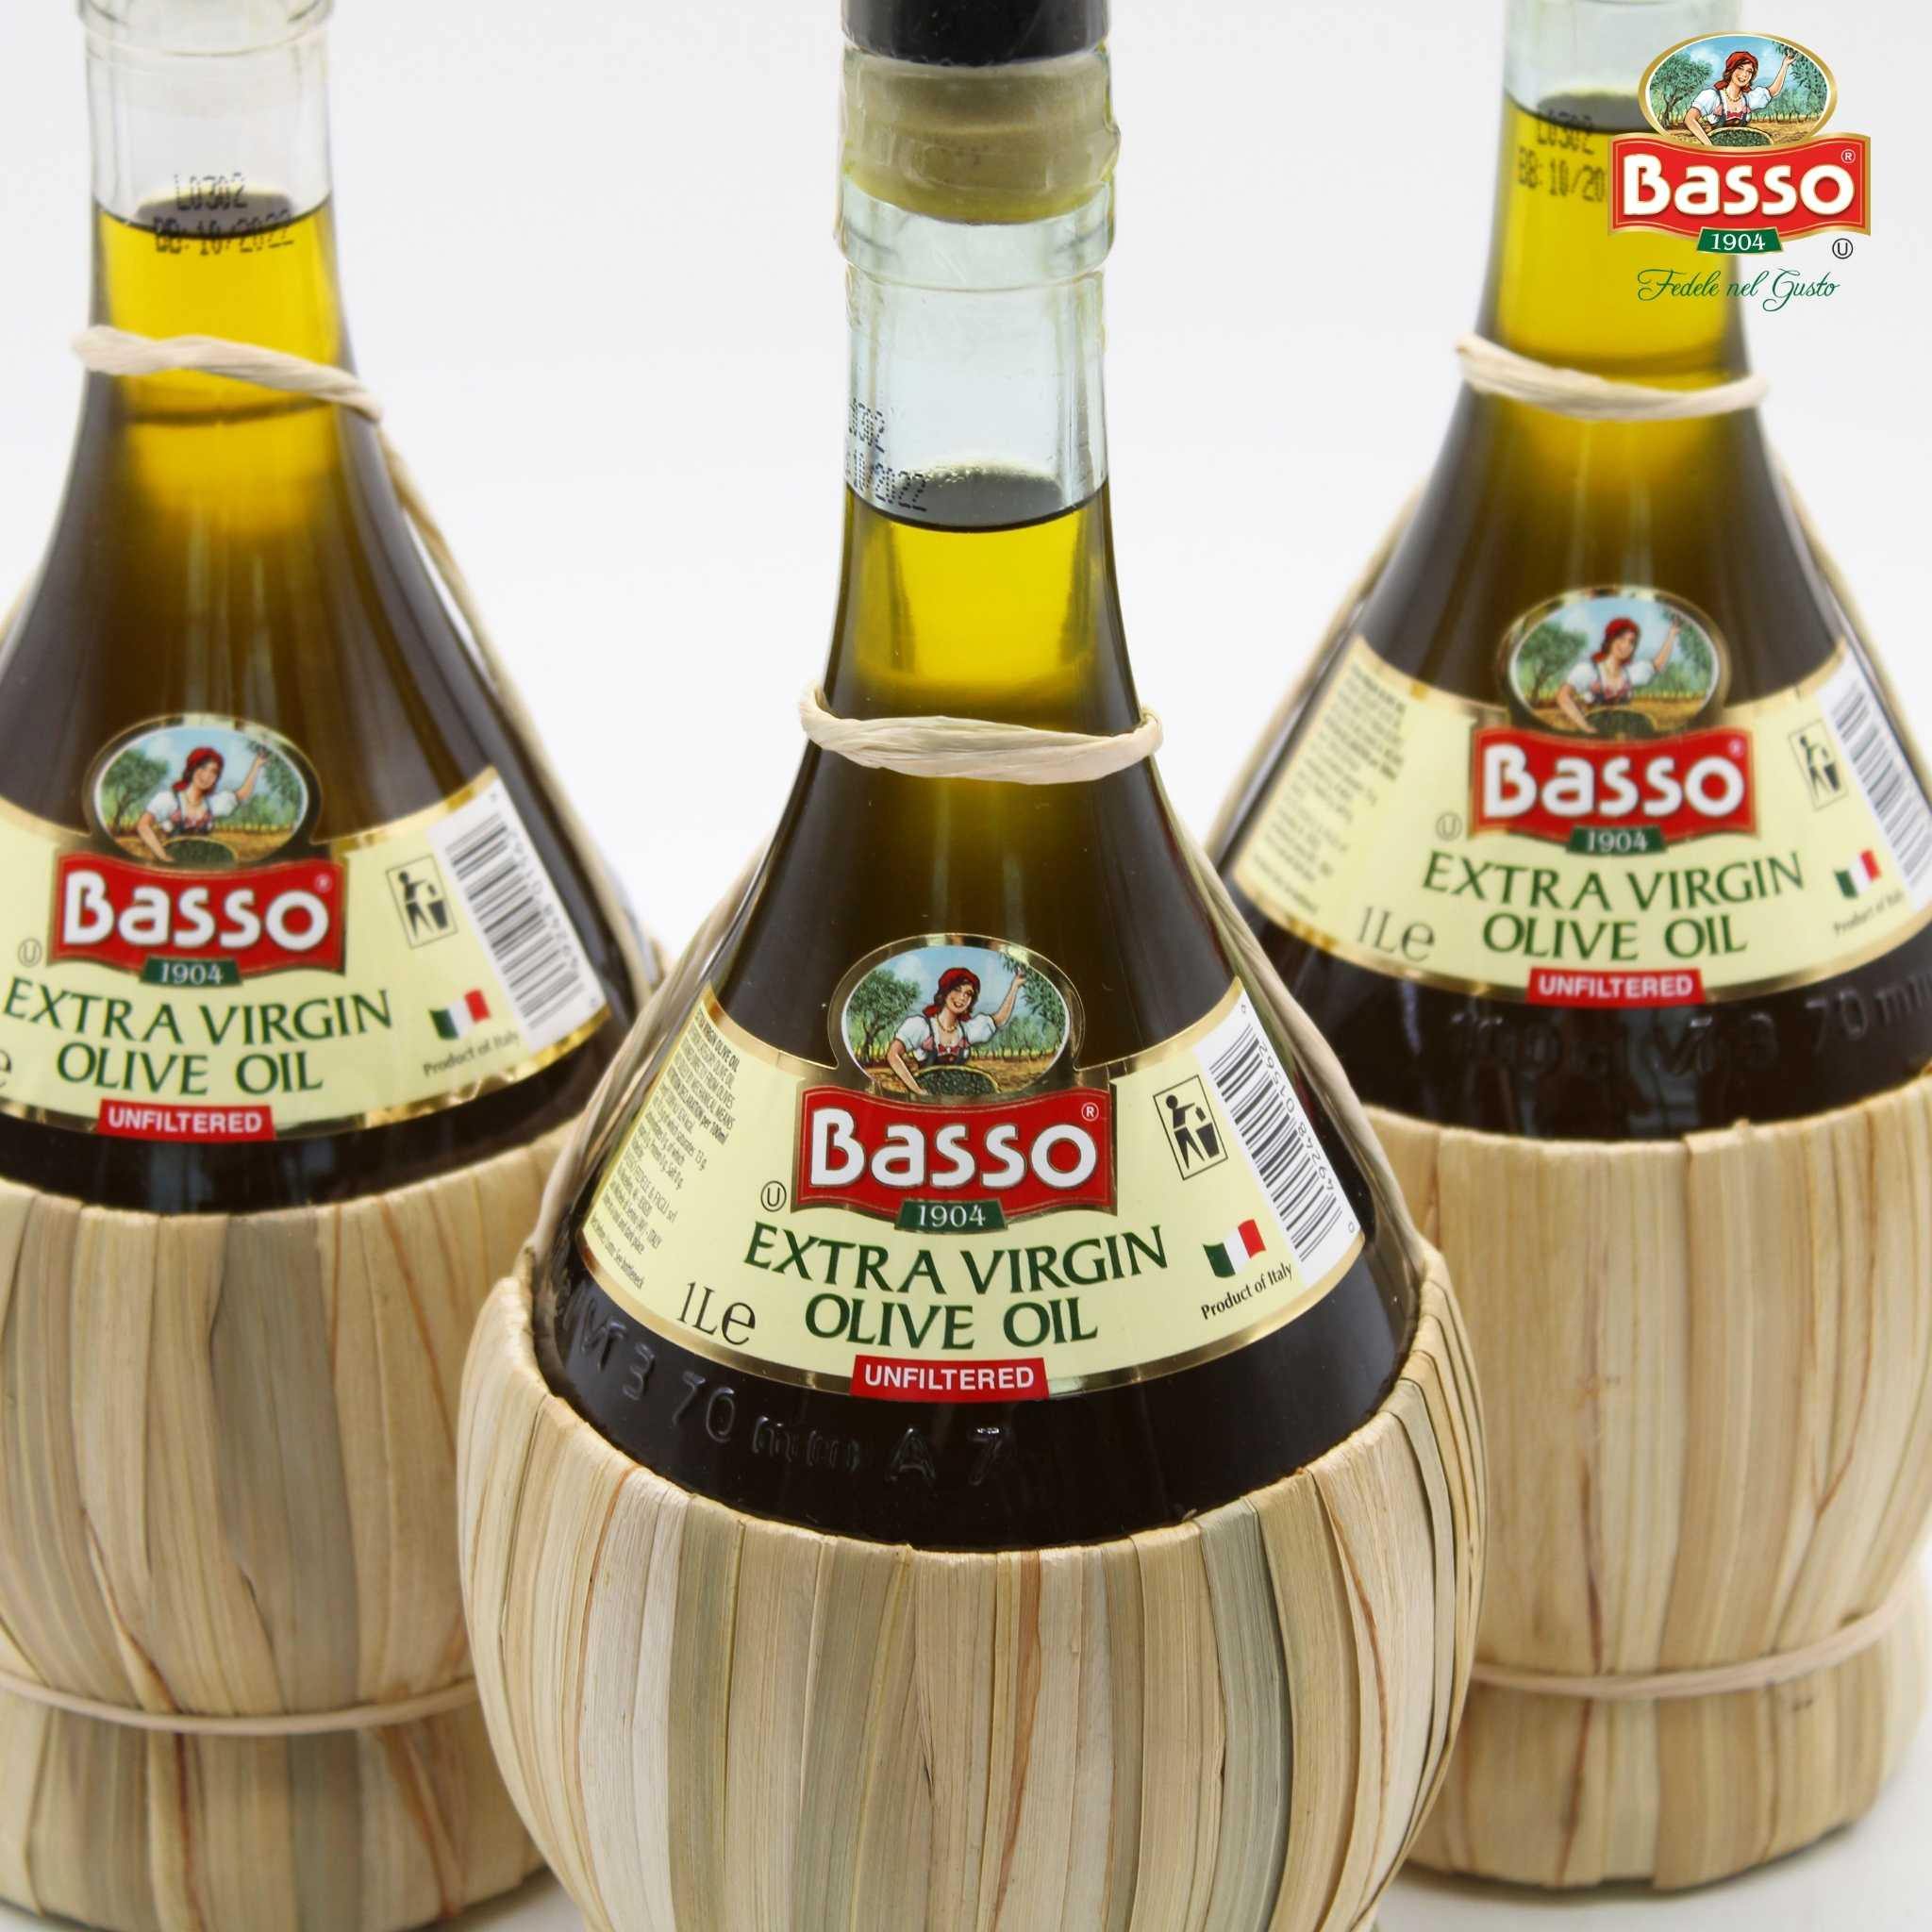 Basso Unfiltered "Premium" First Cold Pressed" Extra Virgin Olive Oil (Wicker / Straw Basket)